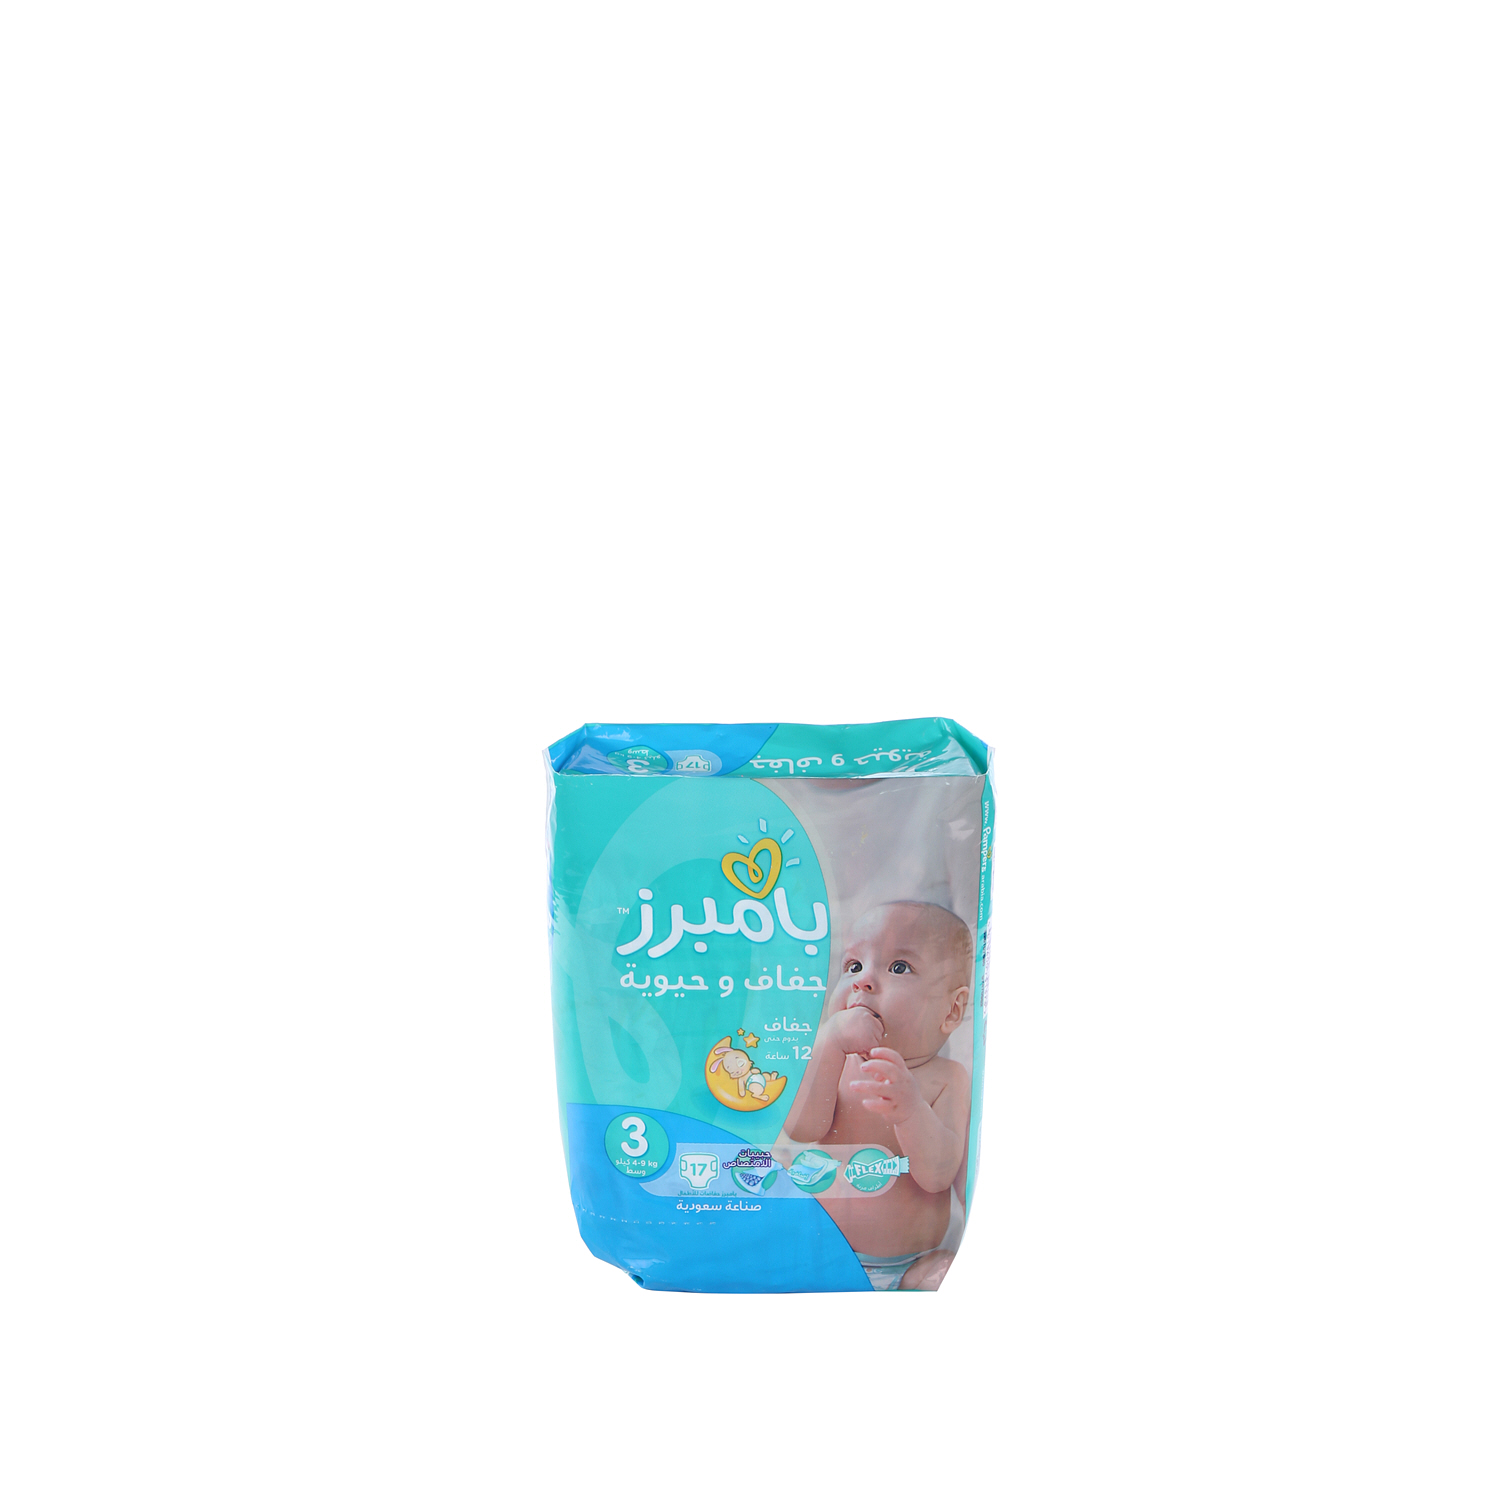 Pampers Baby-Dry Diapers With Aloe Vera Lotion & Leakage Protection, Size 3, For 6-10 kg Baby, Pack of 17